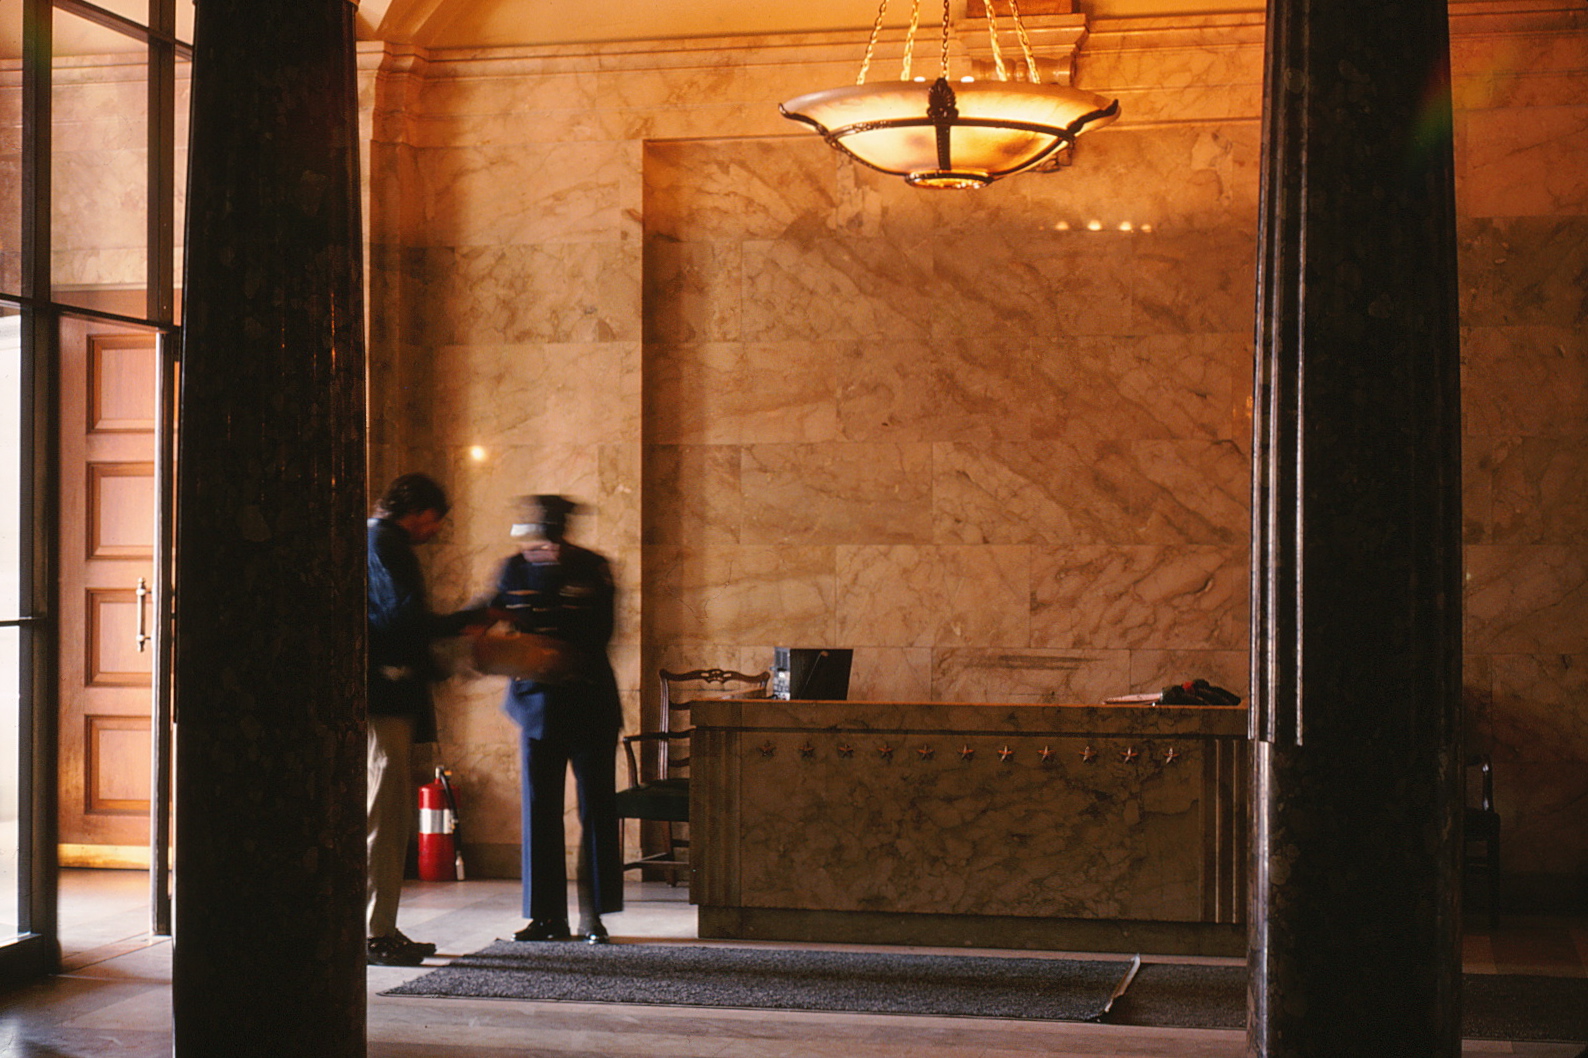 Photograph of the Capitol lobby featuring two guards and the main security desk